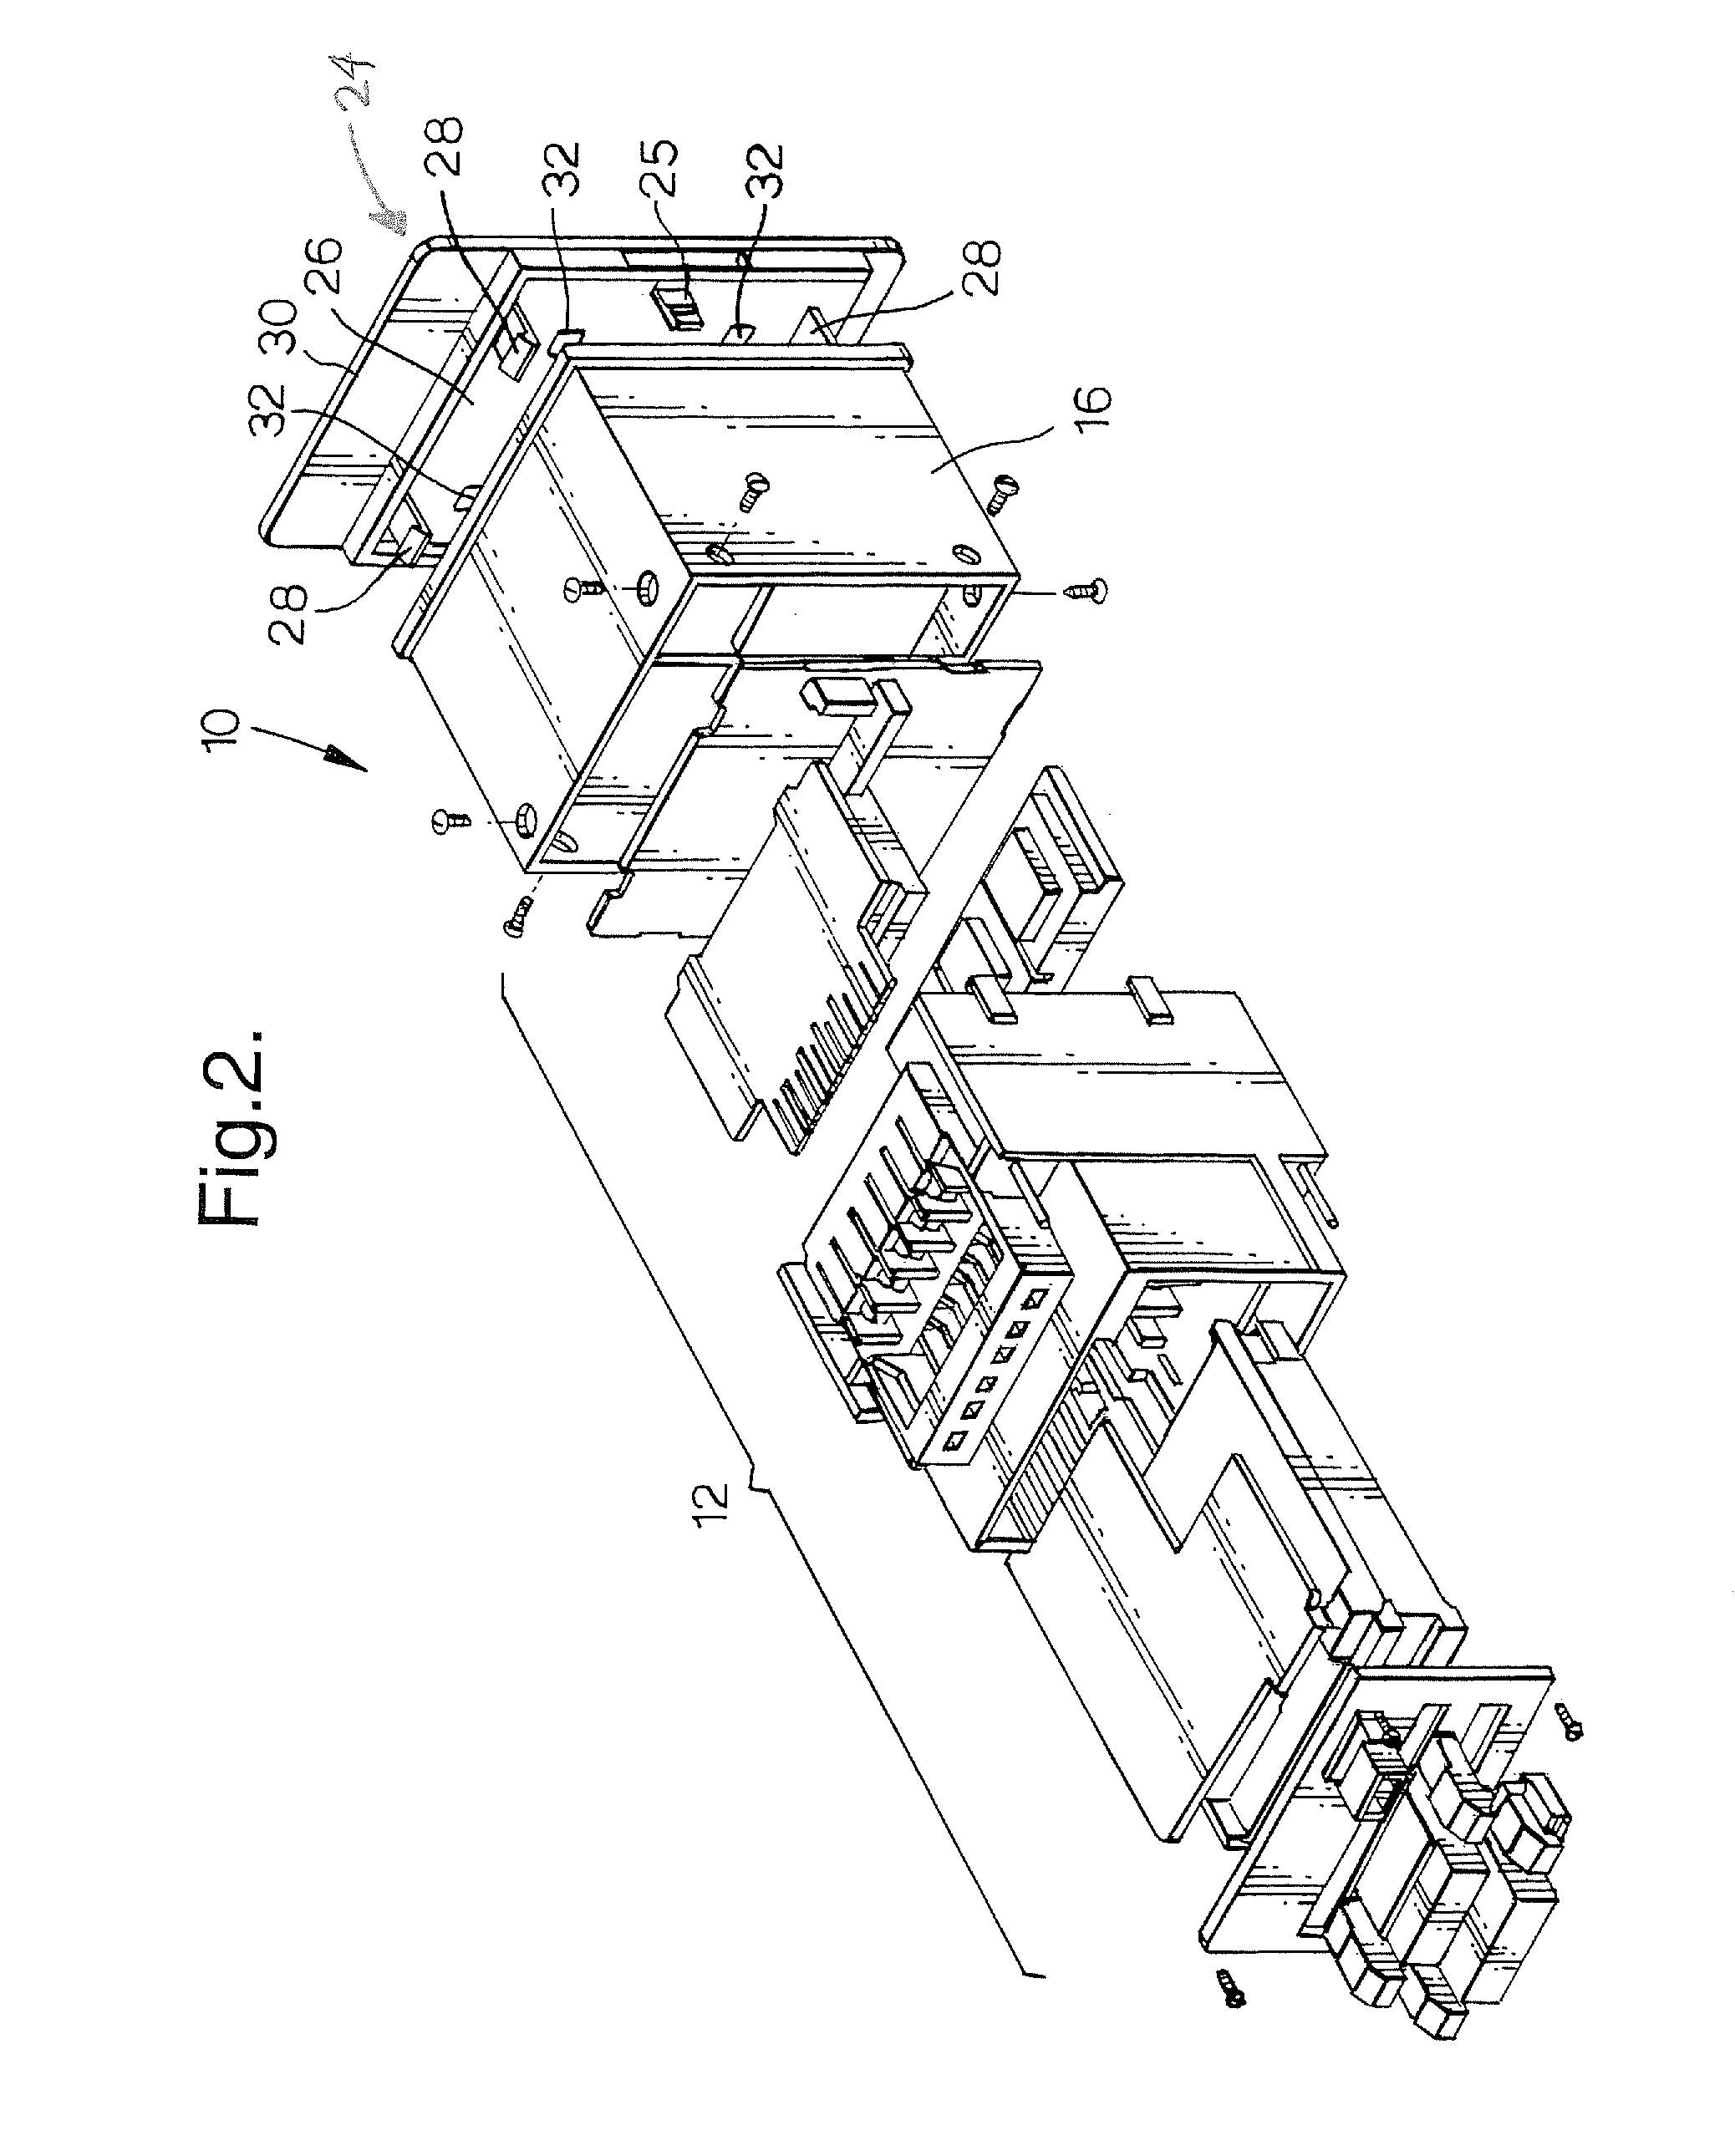 Modular housing for electrical instrument and mounting member therefor